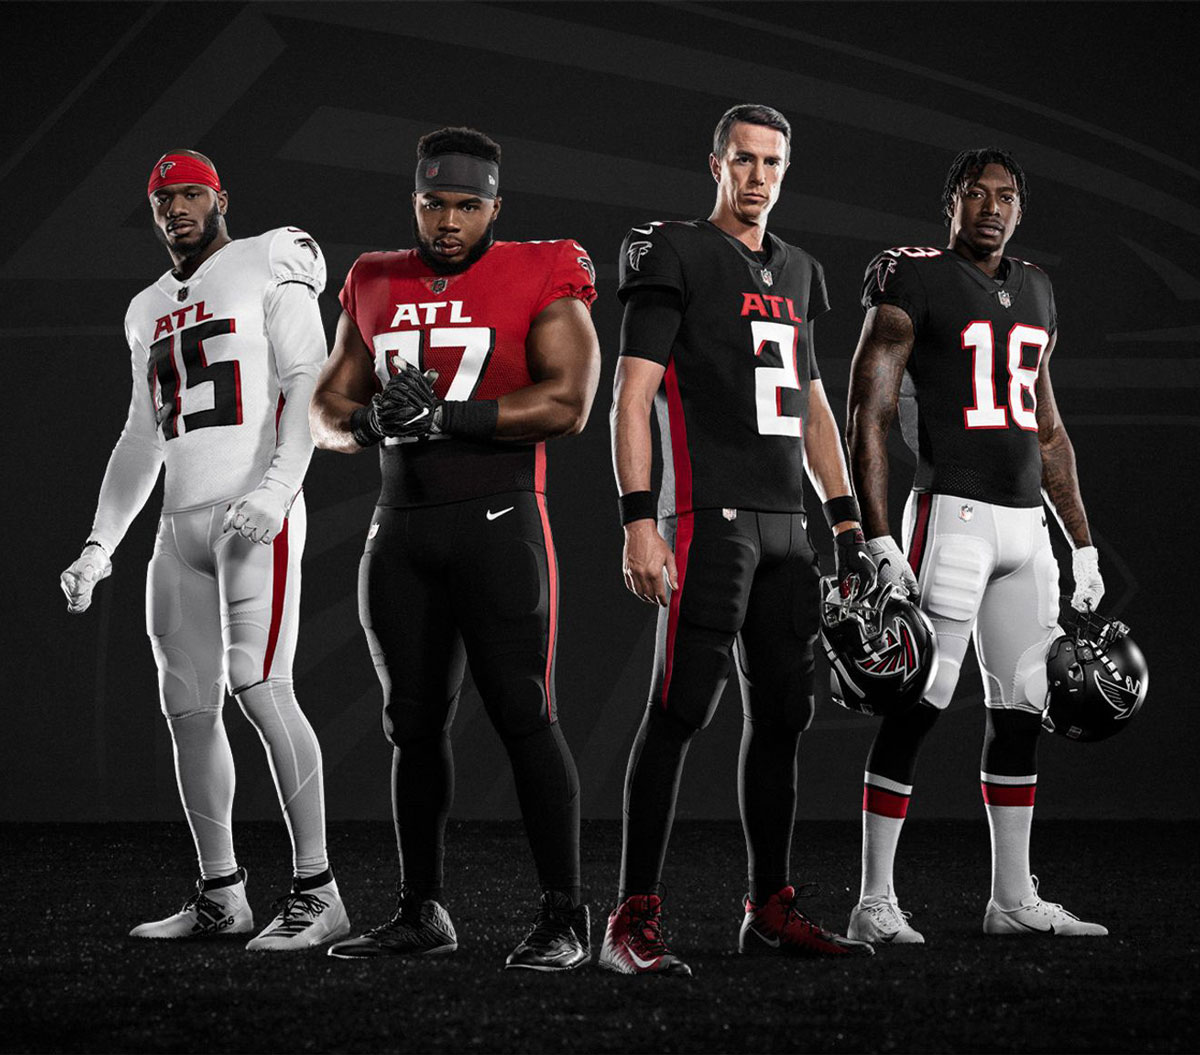 31. Atlanta Falcons. You never want to make a new uniform that shoots you to the bottom of the rankings but these are bad, the ATL is small team energy, the fade is abysmal. Will be replaced as soon as the time limit is up